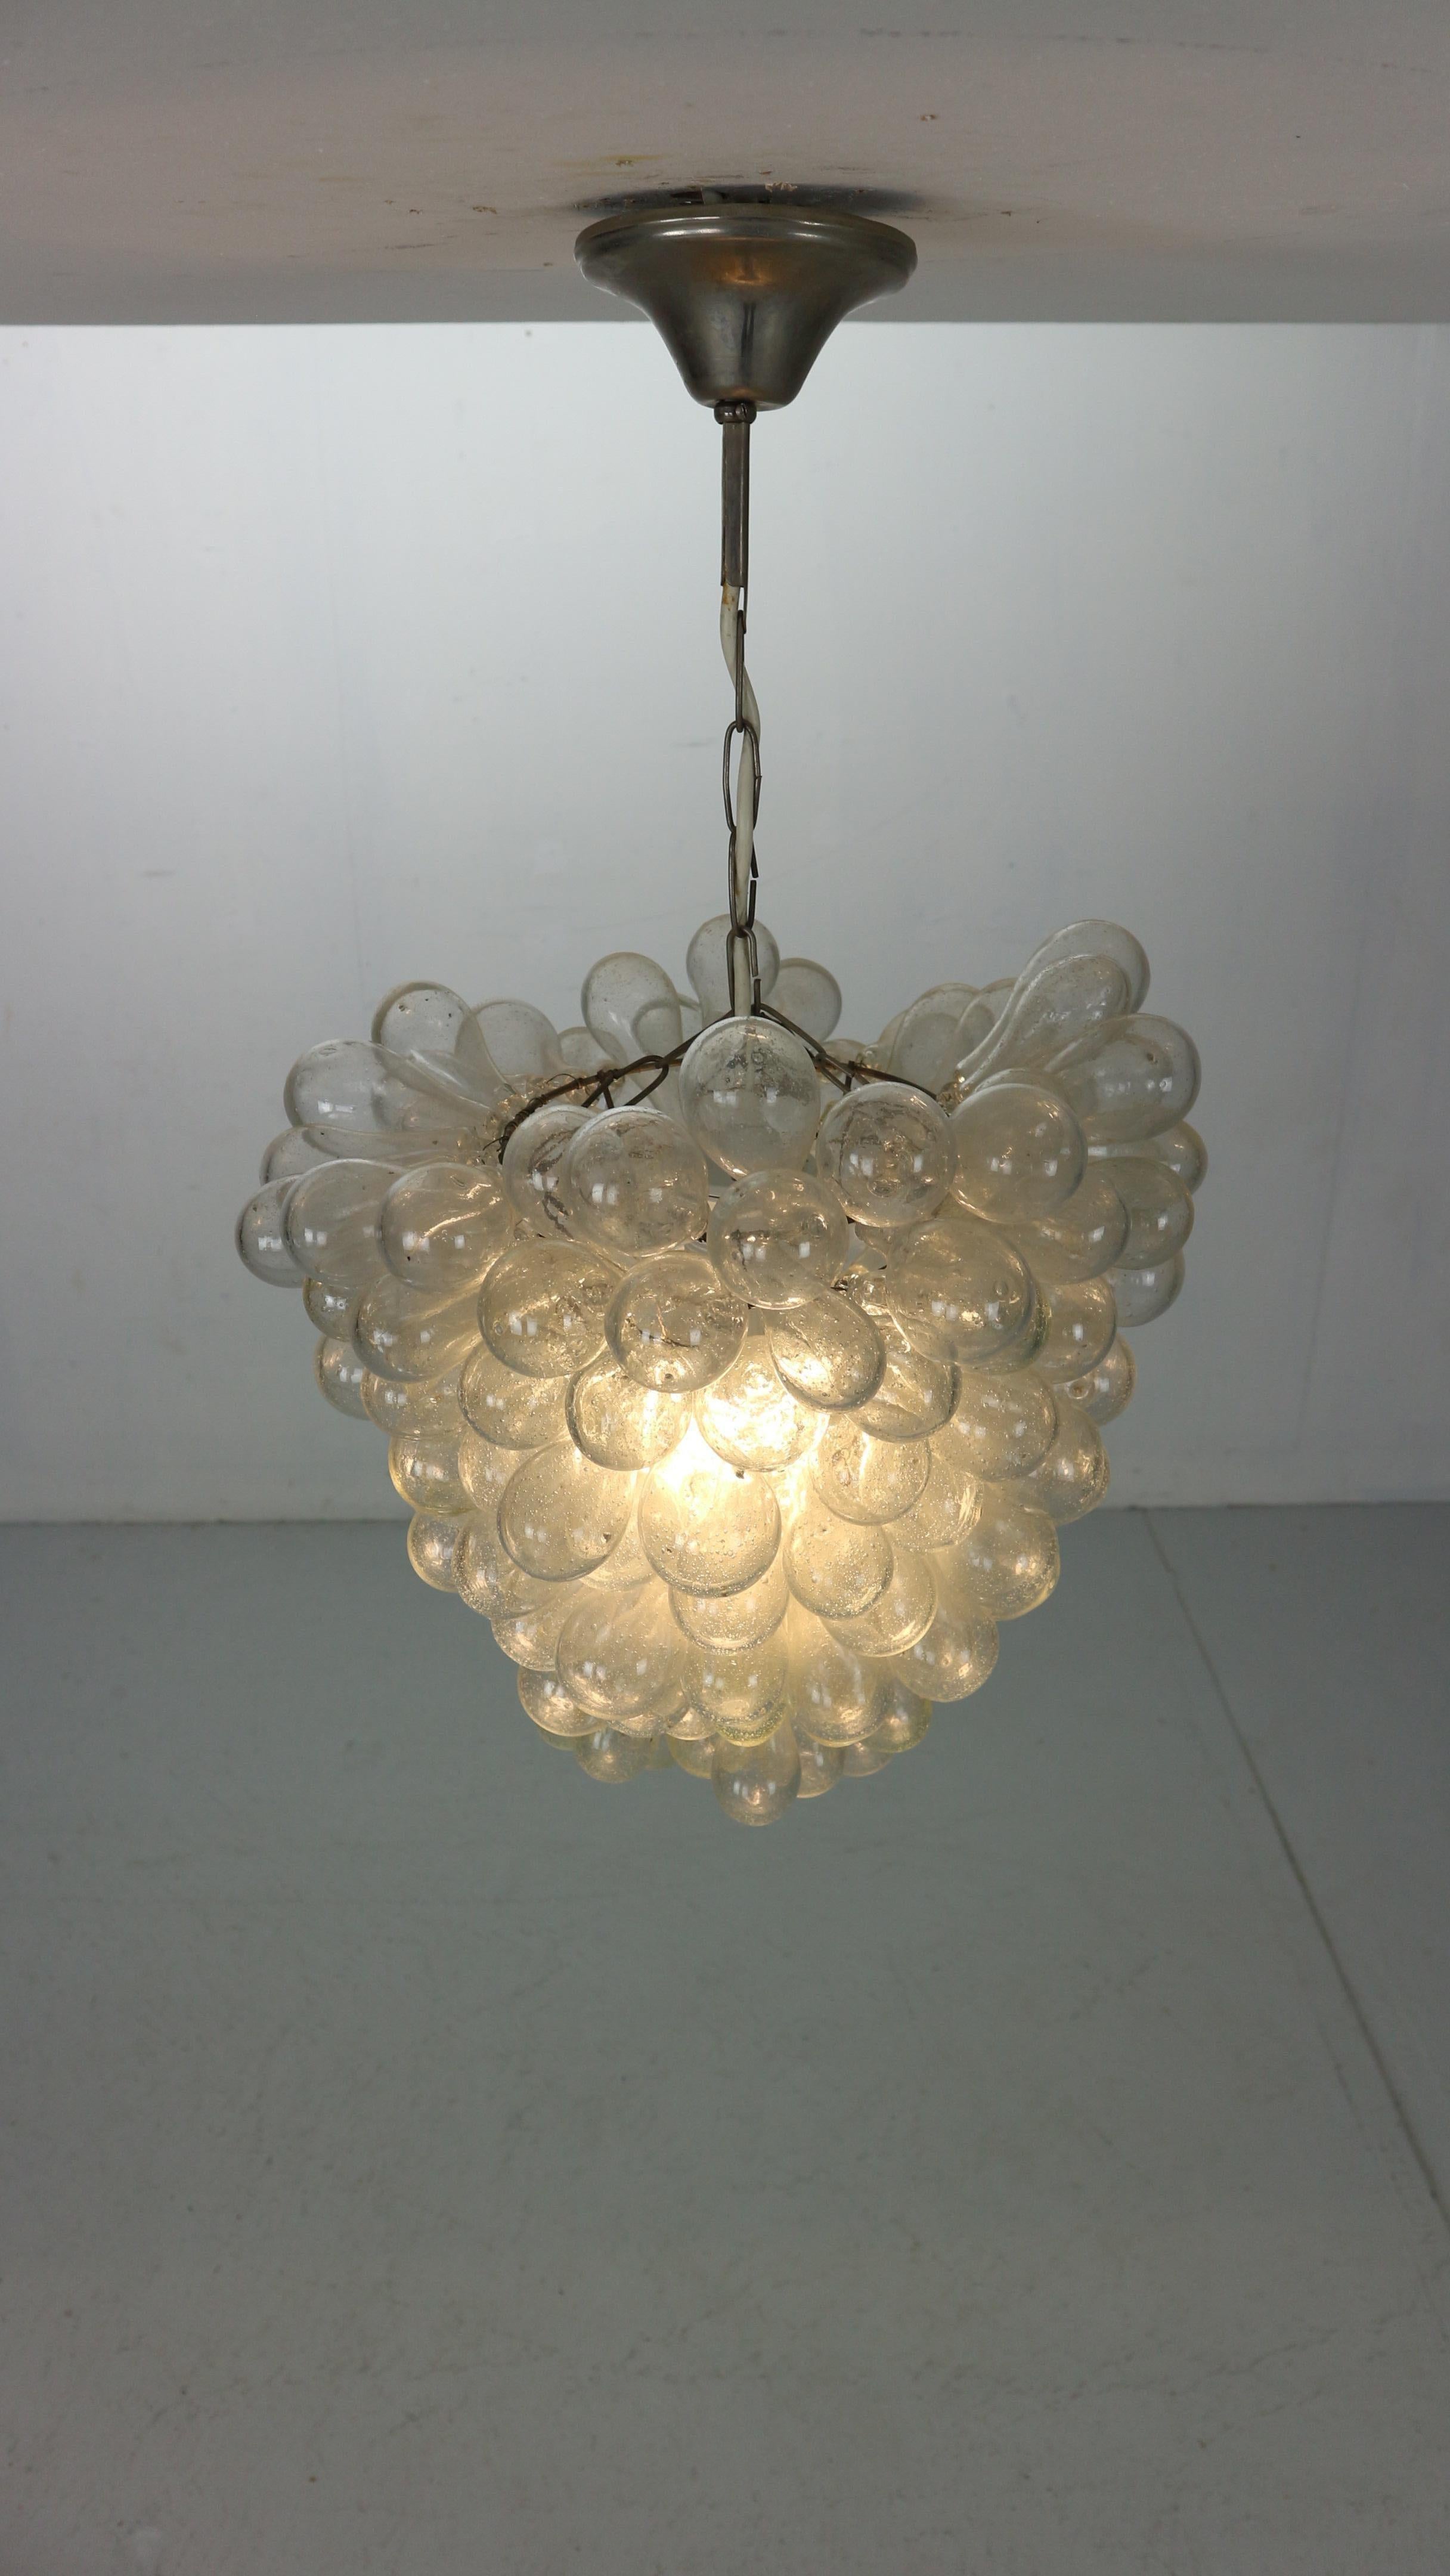 Stunning clear glass grape ceiling light hand-made from 100% recycled glass in 1930's Italy.

Each delicate grape is hand-blown in Damascus by traditional craftsmen and mounted on a metal frame to create dozens of unique, individually created